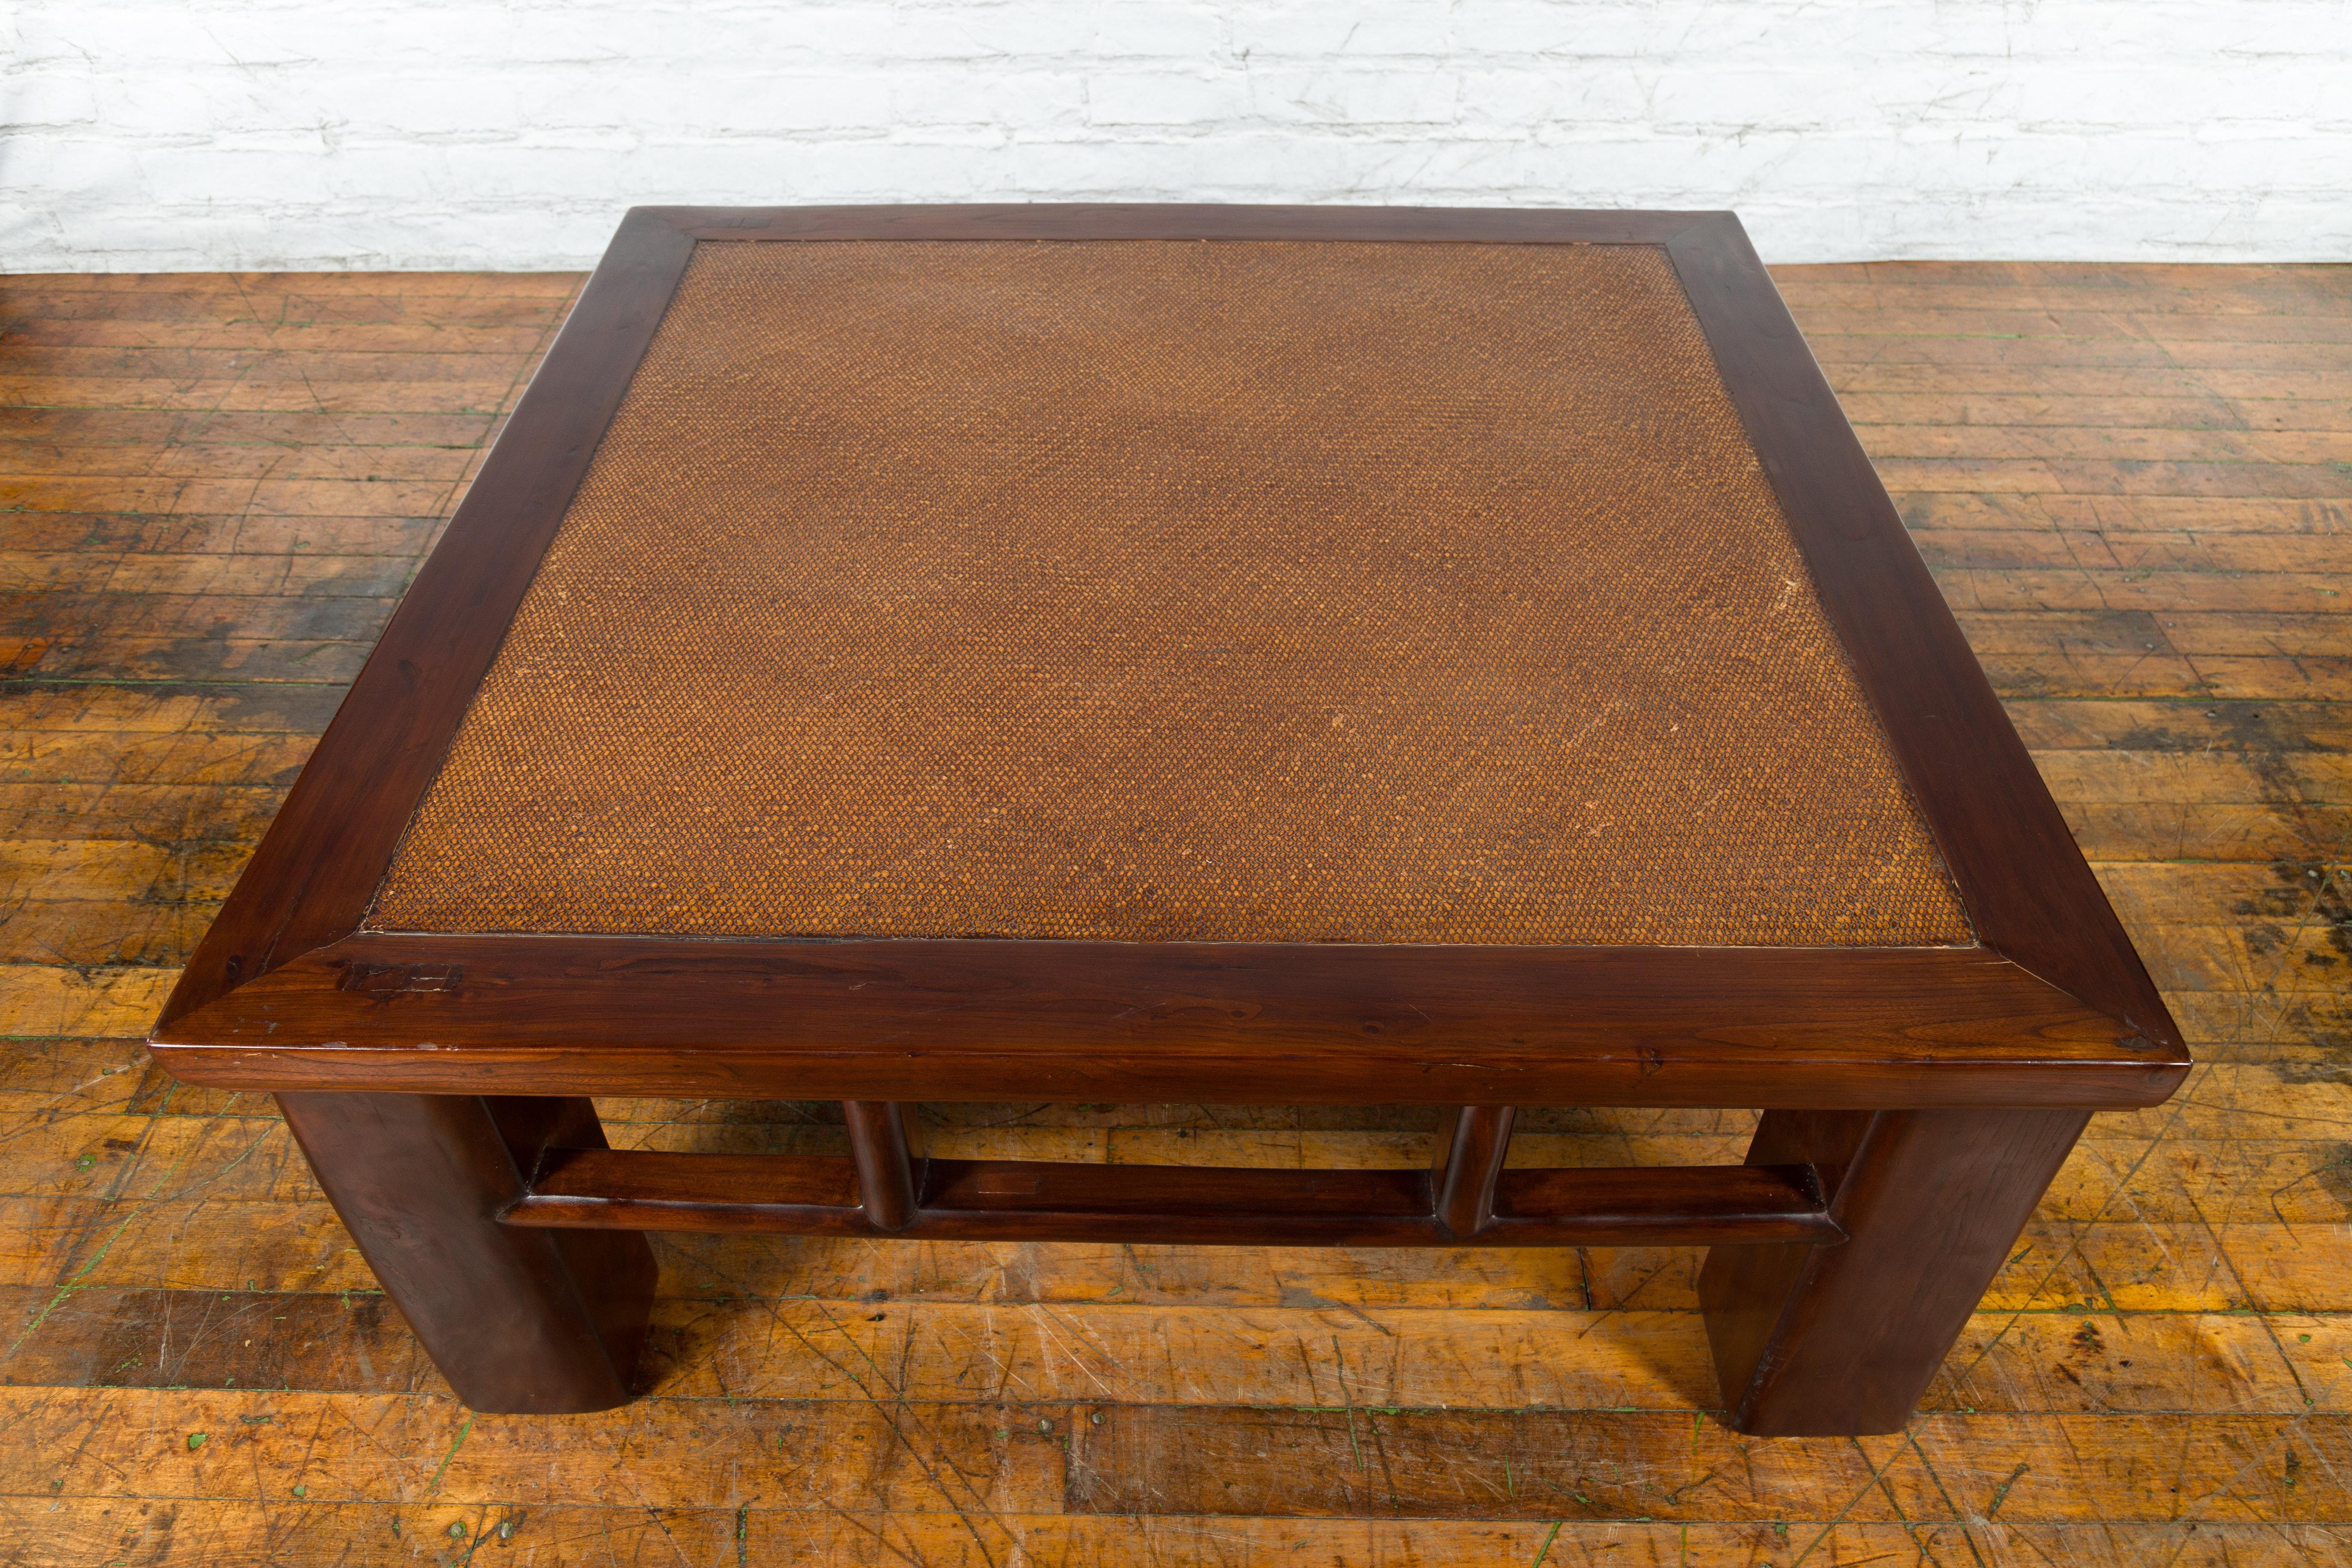 Chinese Early 20th Century Elmwood Coffee Table with Woven Rattan Top Inset For Sale 5